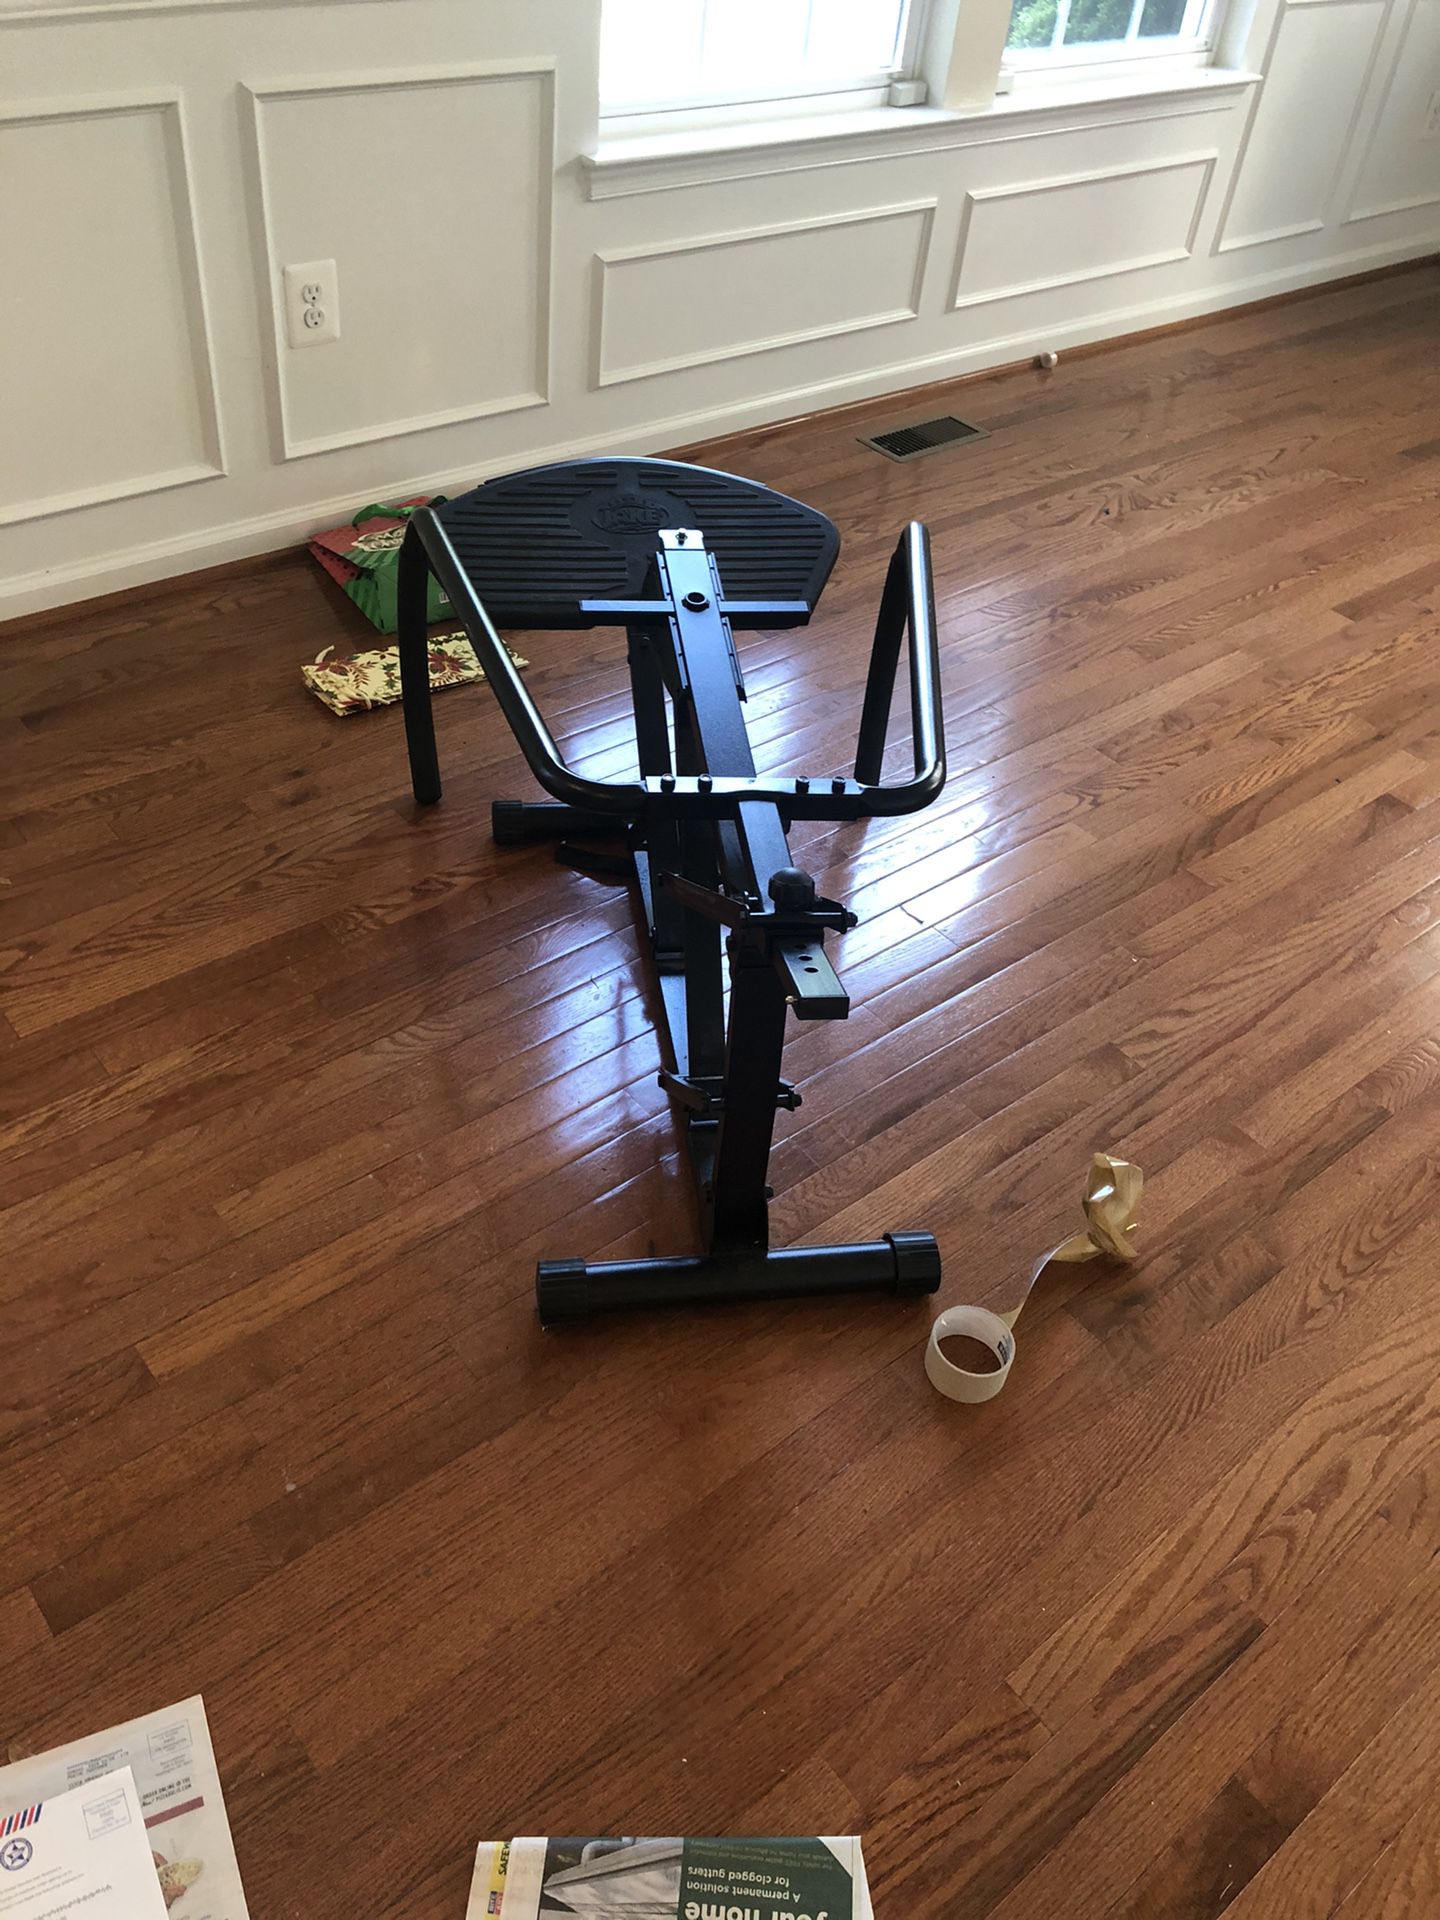 Workout equipment for FREE